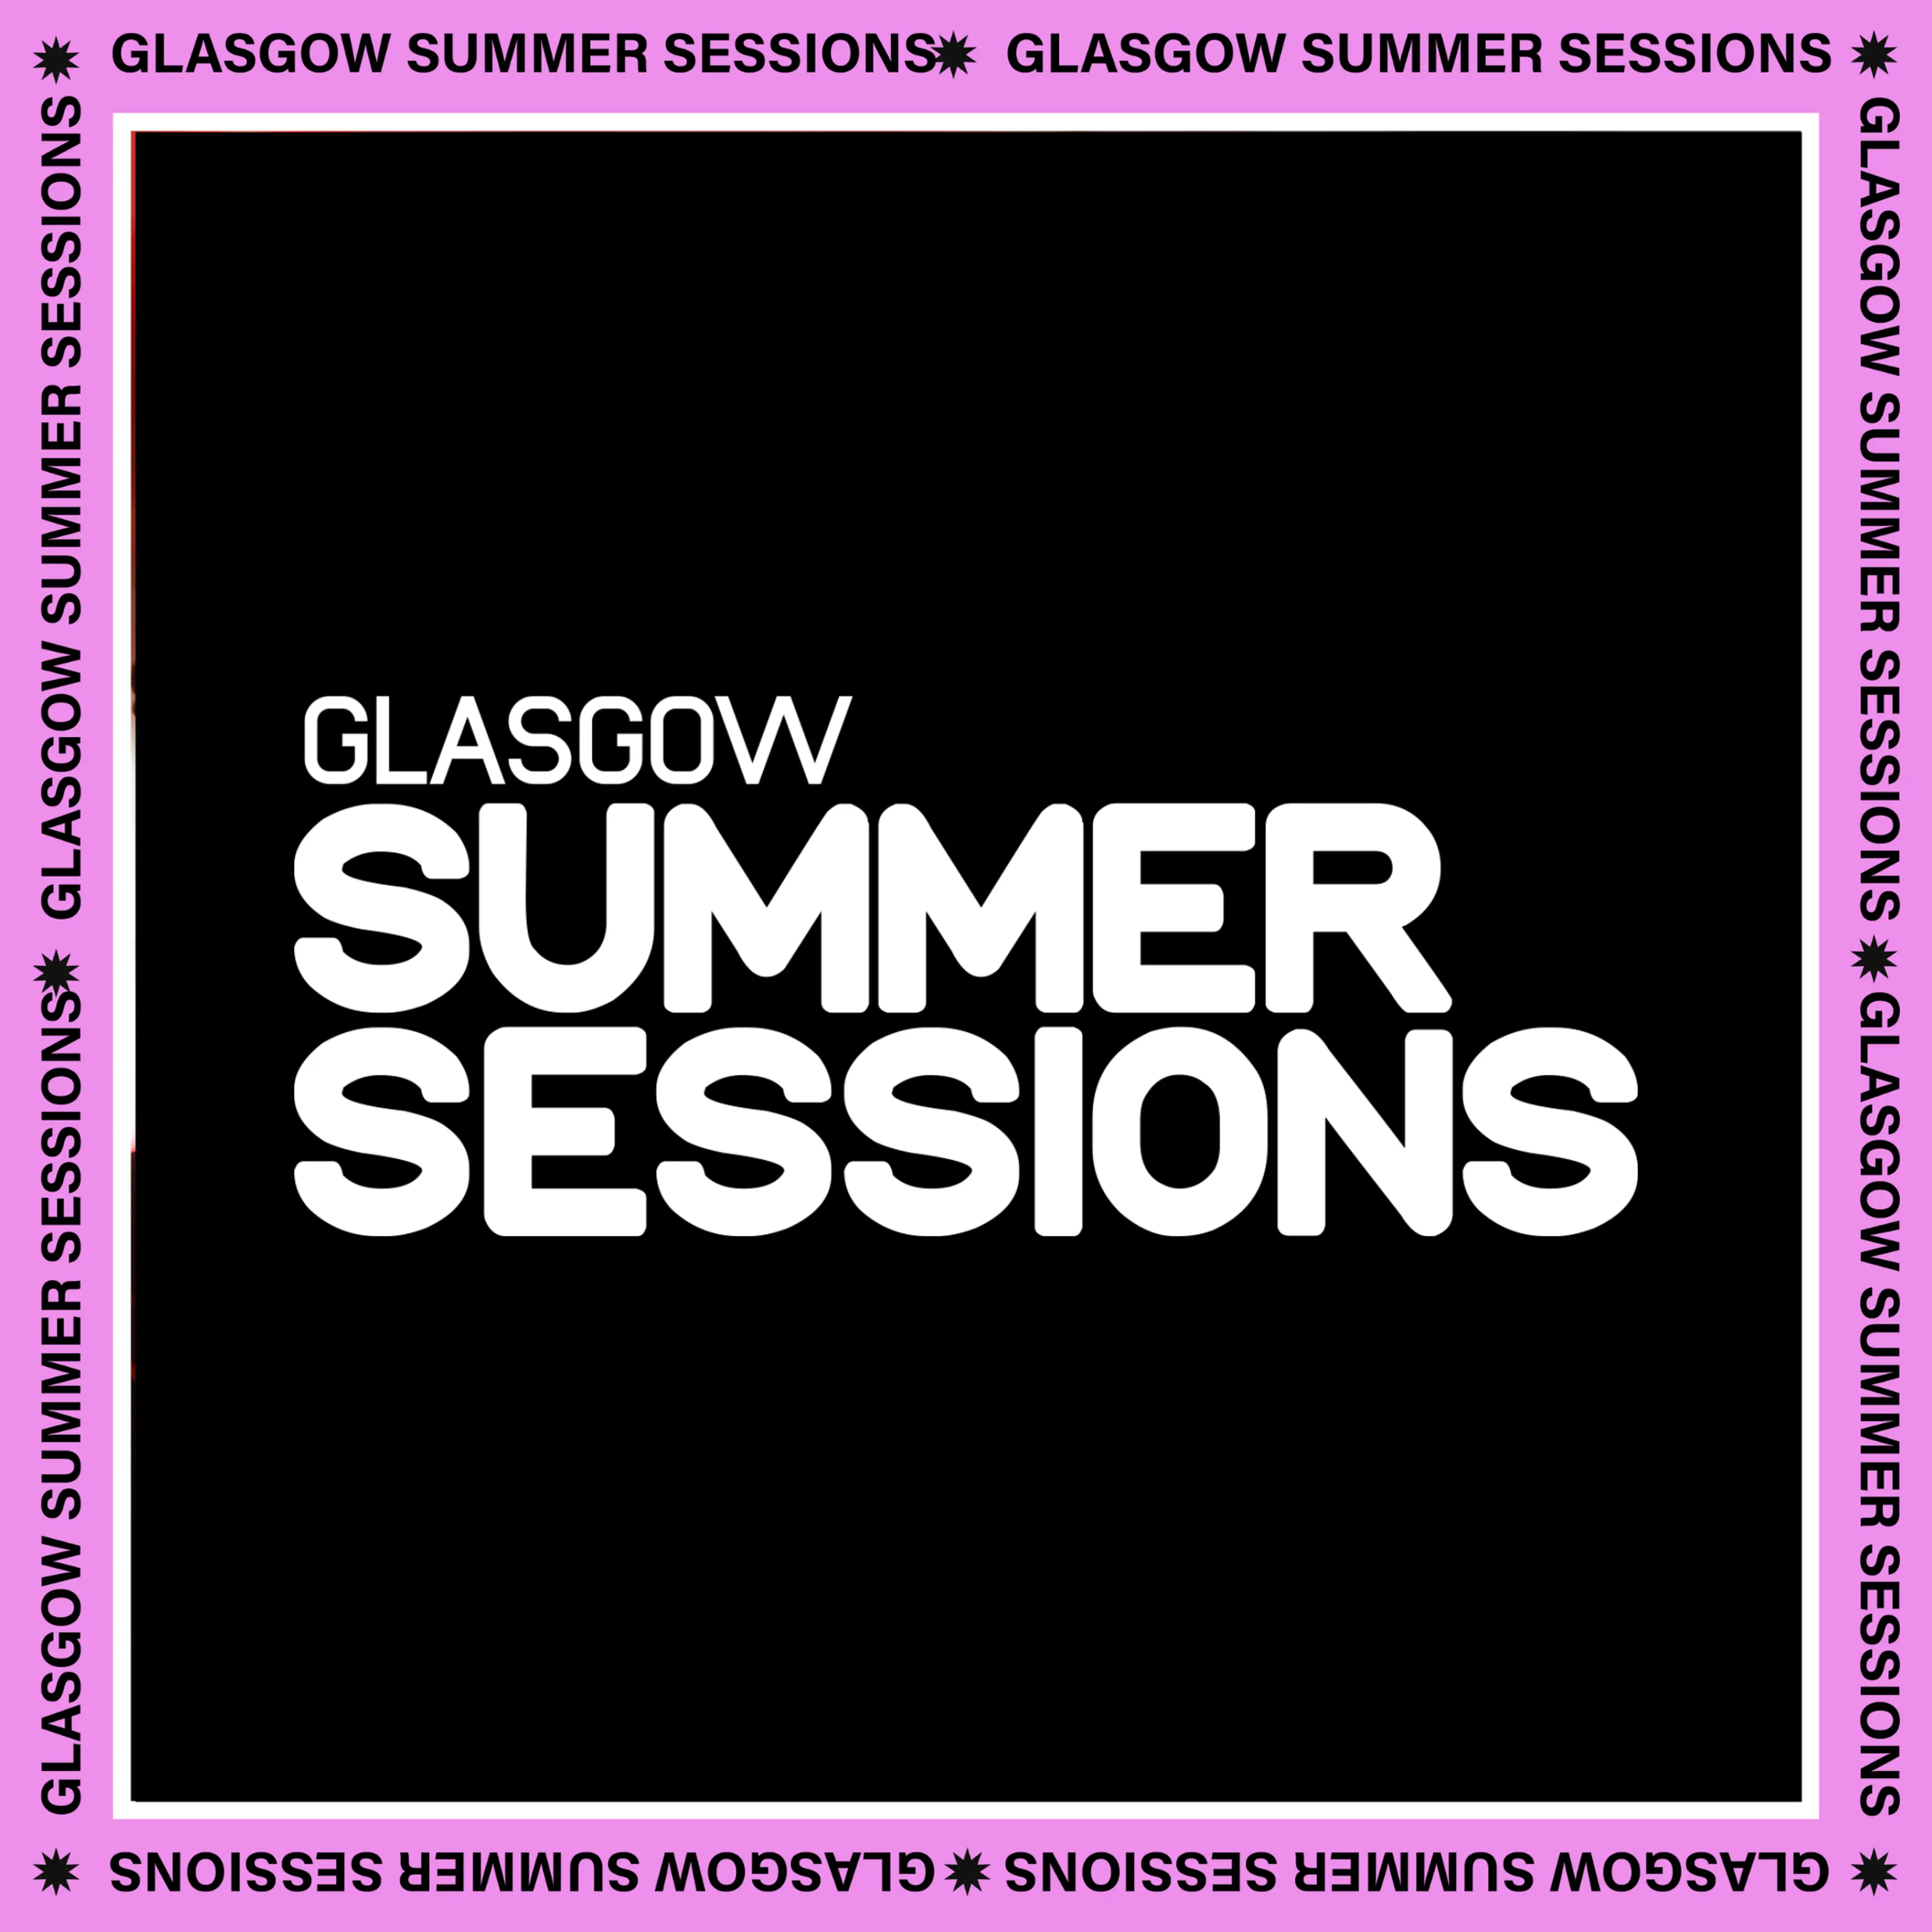 SUMMER SESSIONS RETURNS TO GLASGOW